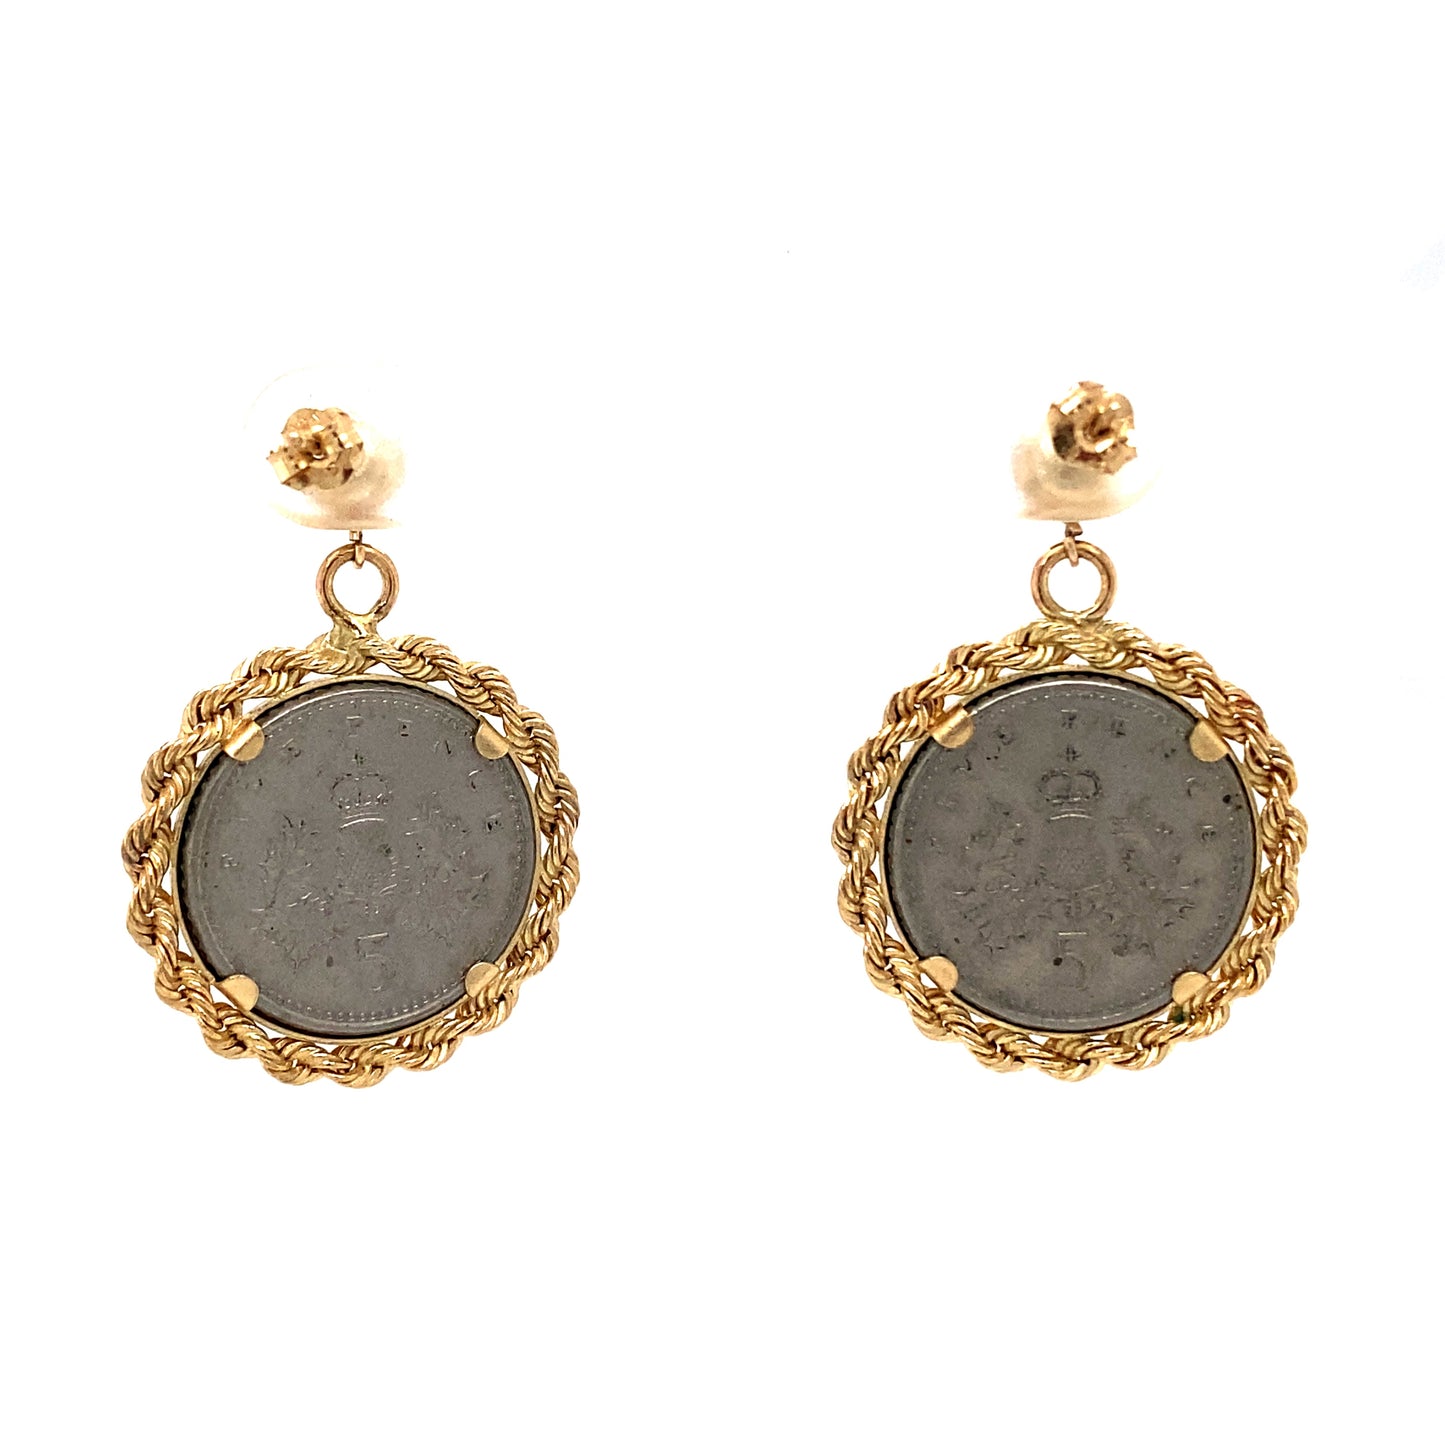 Circa 1990 Five British Pence Coin Earrings with Rope Frames in 14K Gold